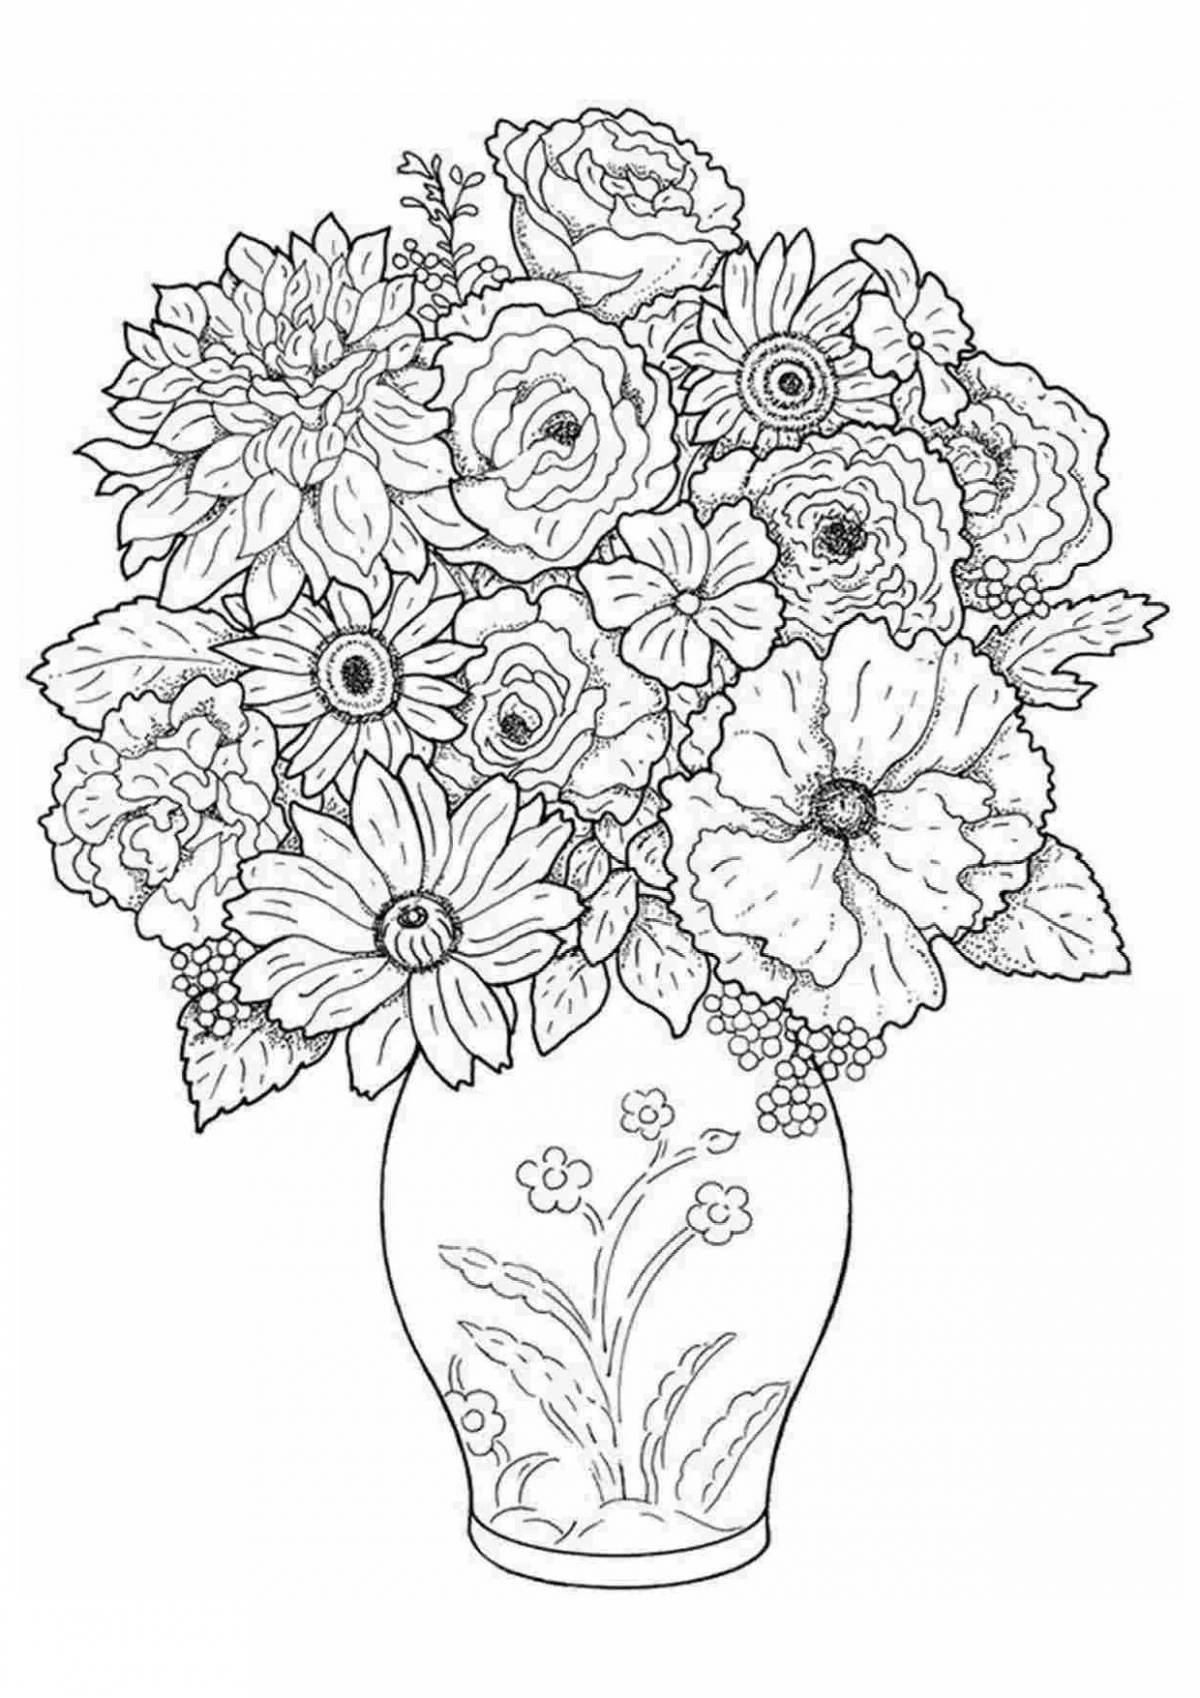 Coloring majestic big flowers in a vase